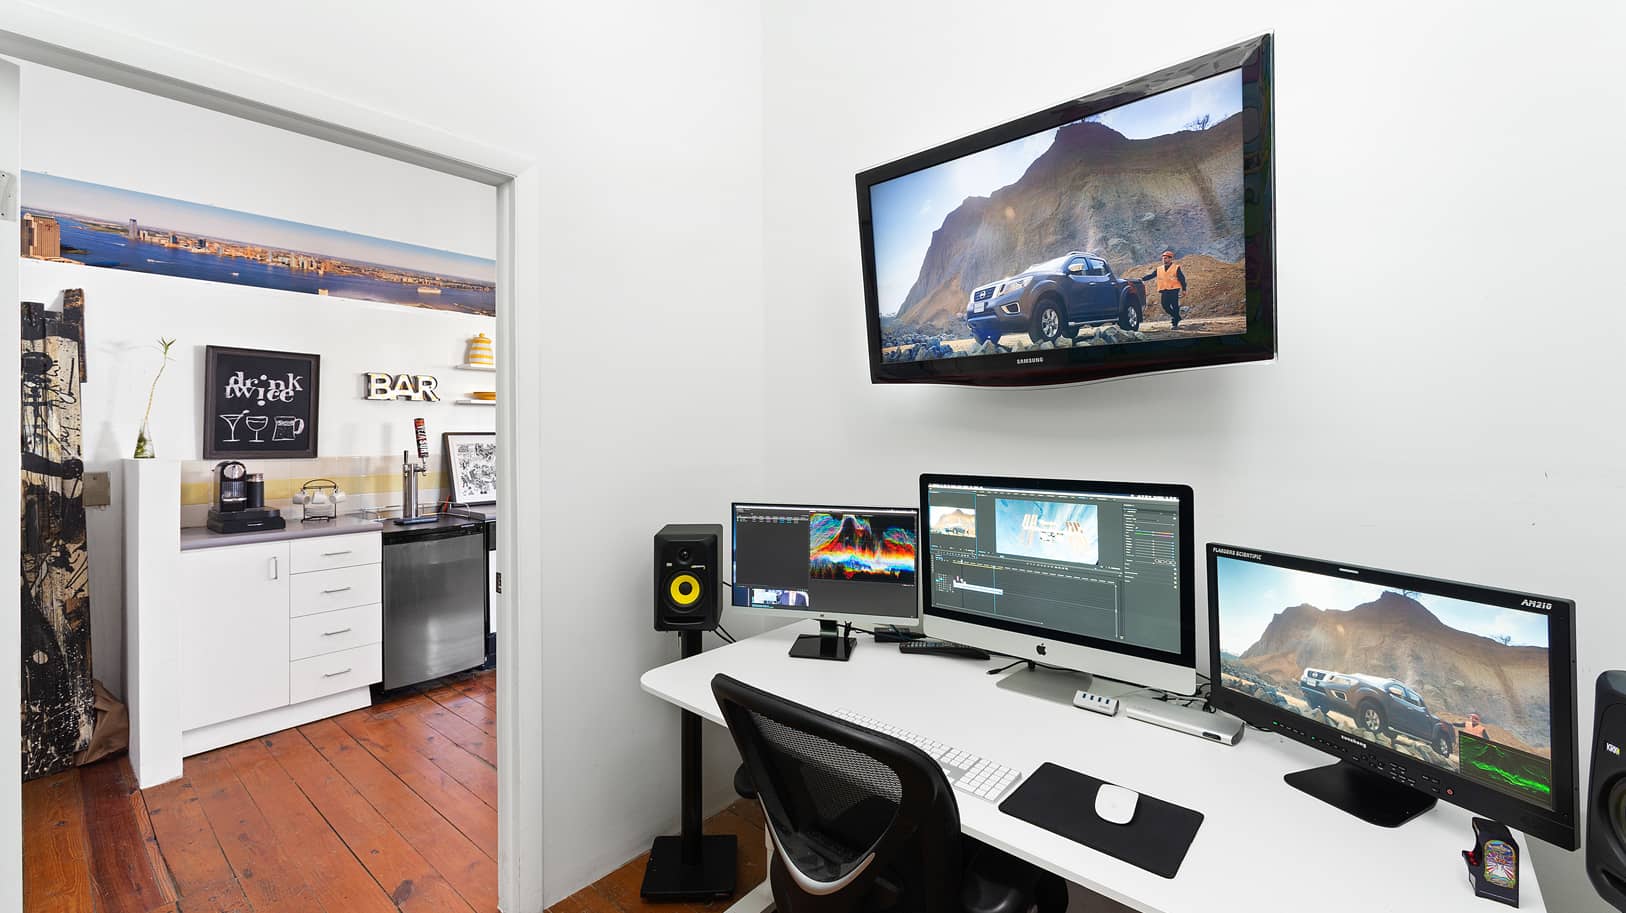 Post-production suite equipment and kitchen in the background | Think Twice studio